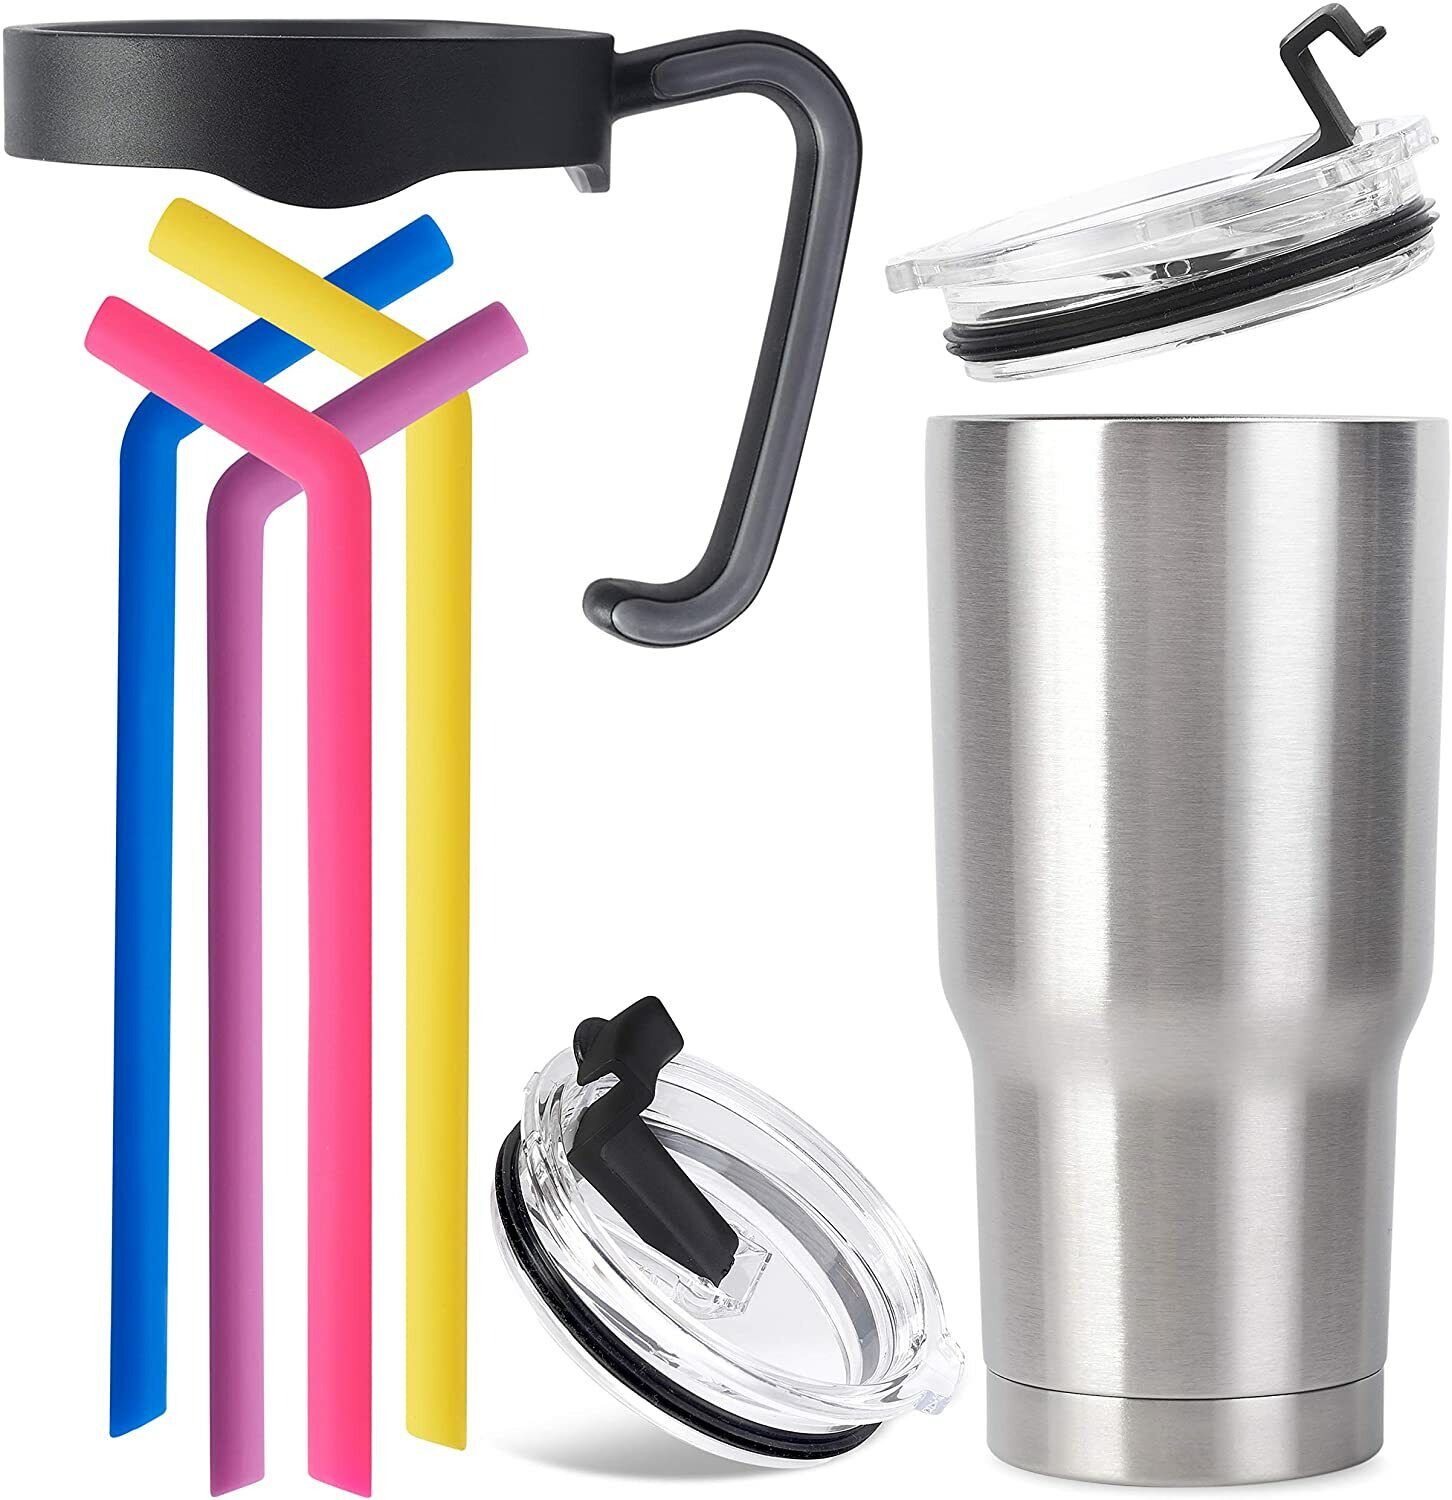 Large 20oz Stainless Steel Tumbler - Hot or Cold, Complete with Reusable Straws